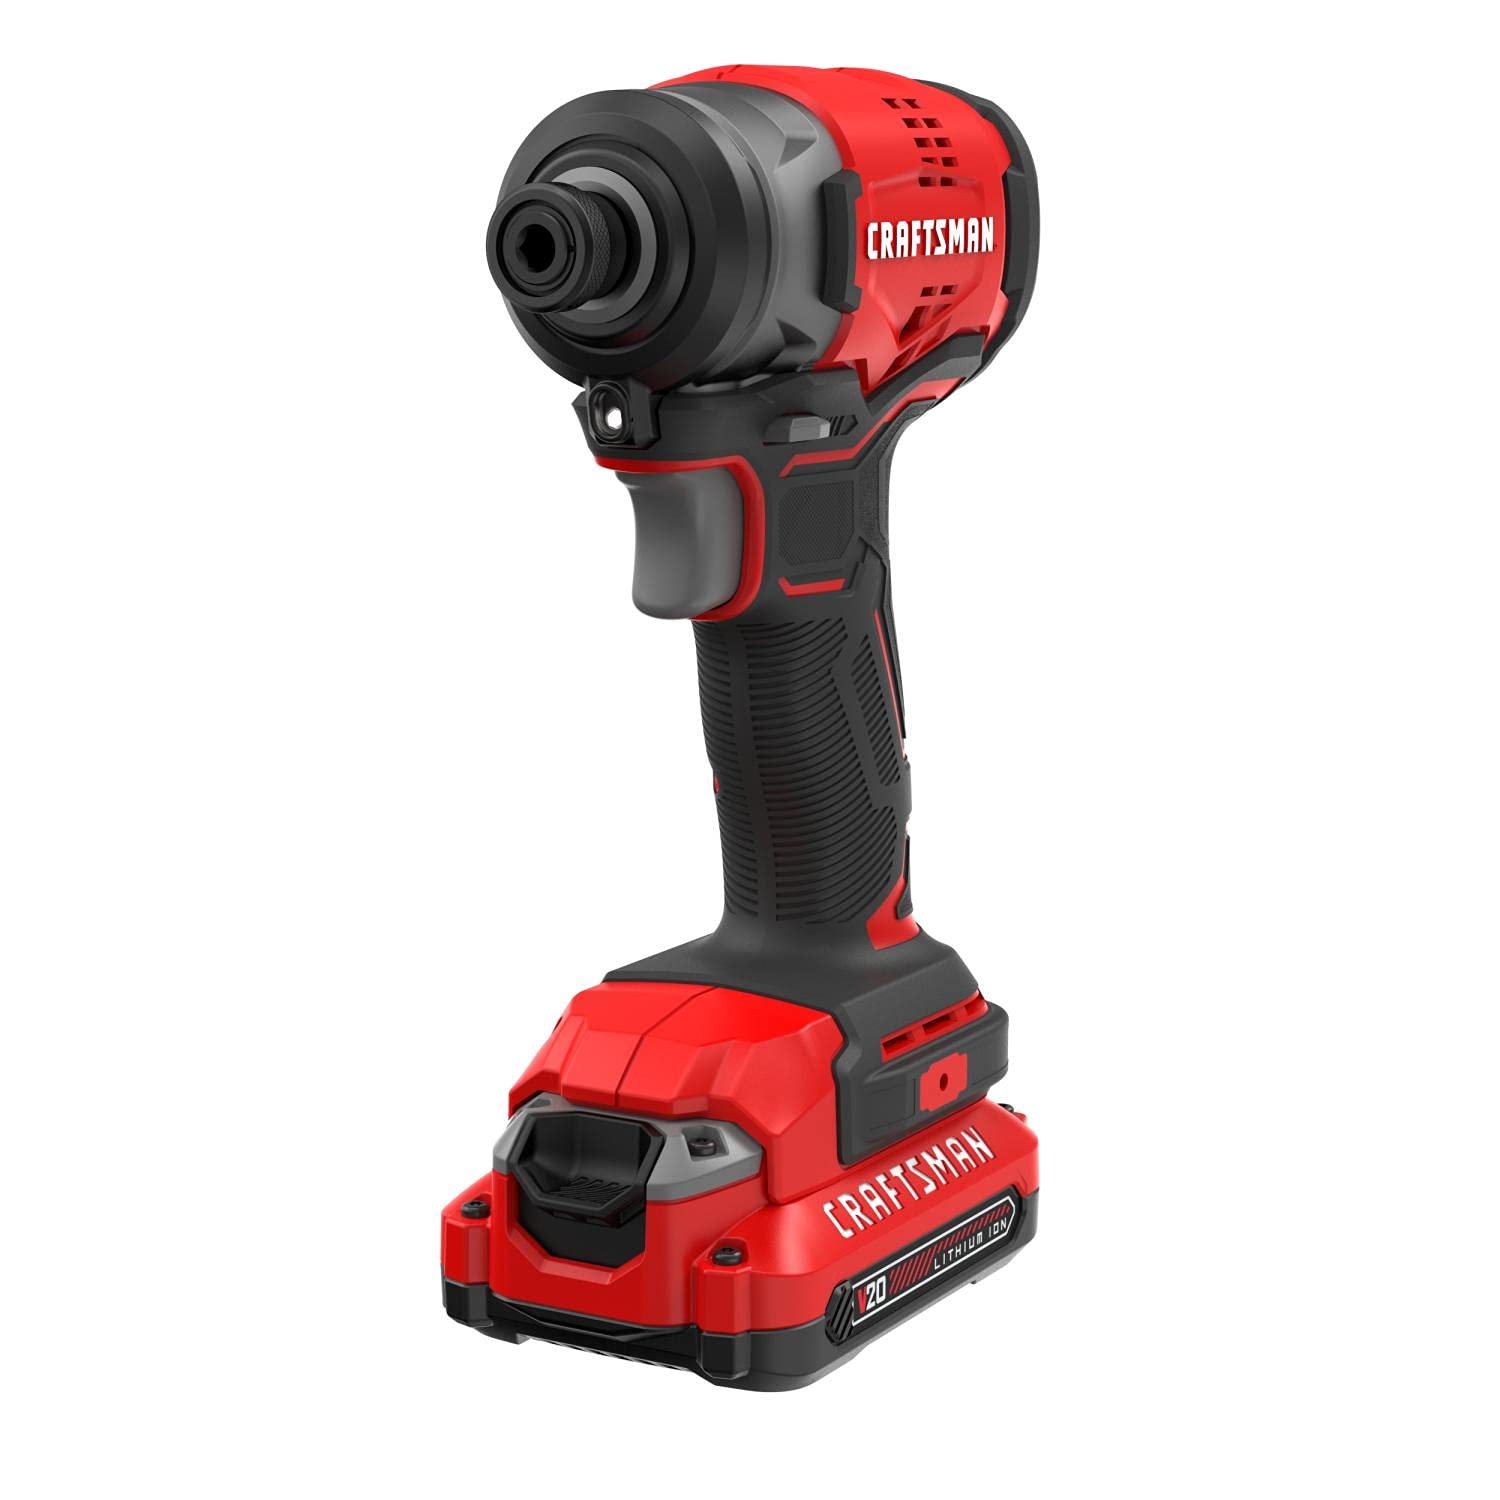 CRAFTSMAN CMCF810C2 V20 20-Volt Max Variable Speed Brushless Cordless Impact Driver, Red